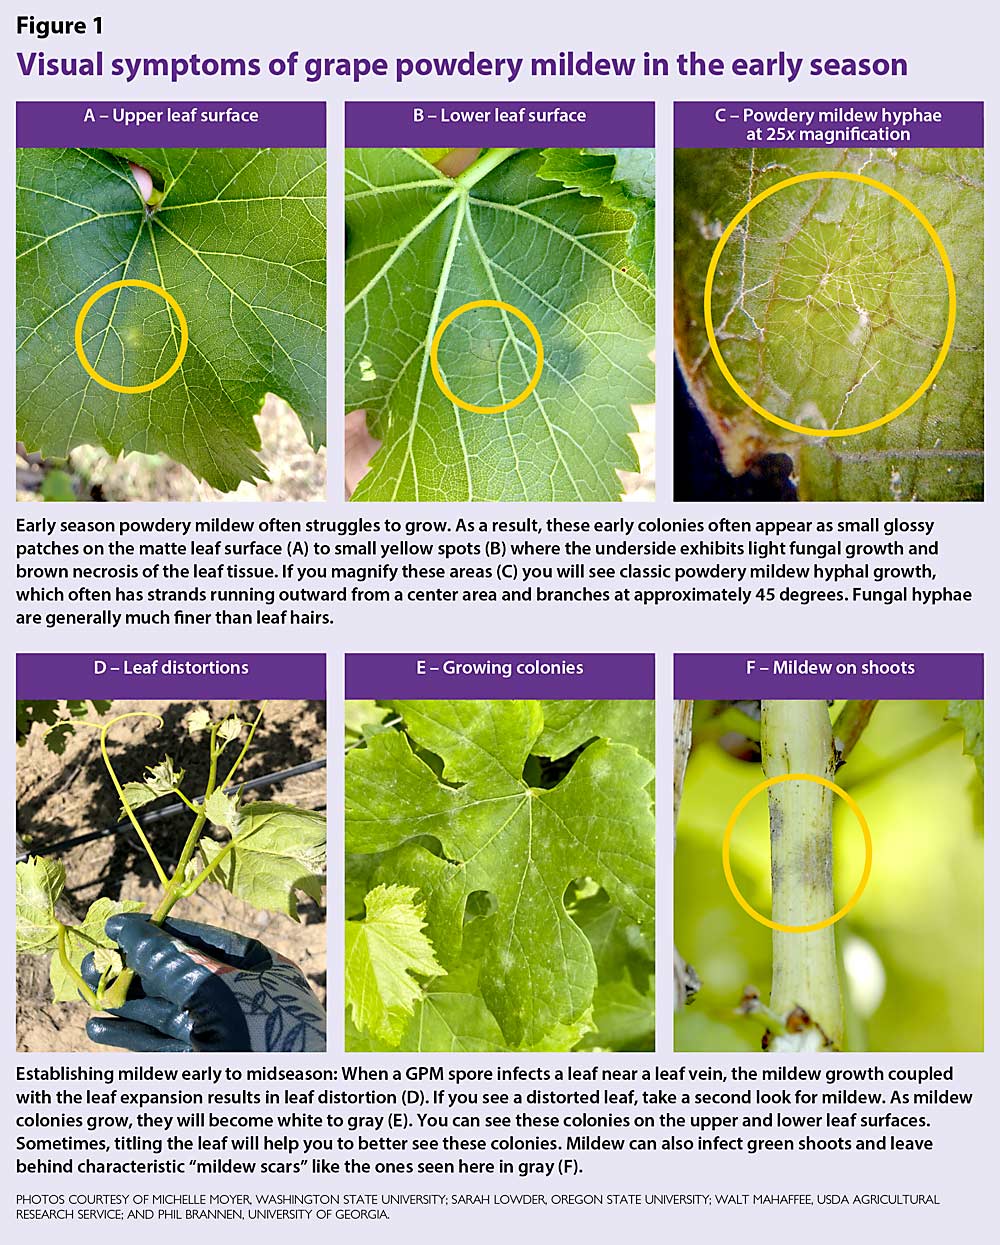 Visual symptoms of grape powdery mildew in the early season. (Photos courtesy of Michelle Moyer, Washington State University; Sarah Lowder, Oregon State University; Walt Mahaffee, USDA Agricultural Research Service; and Phil Brannen, University of Georgia.)